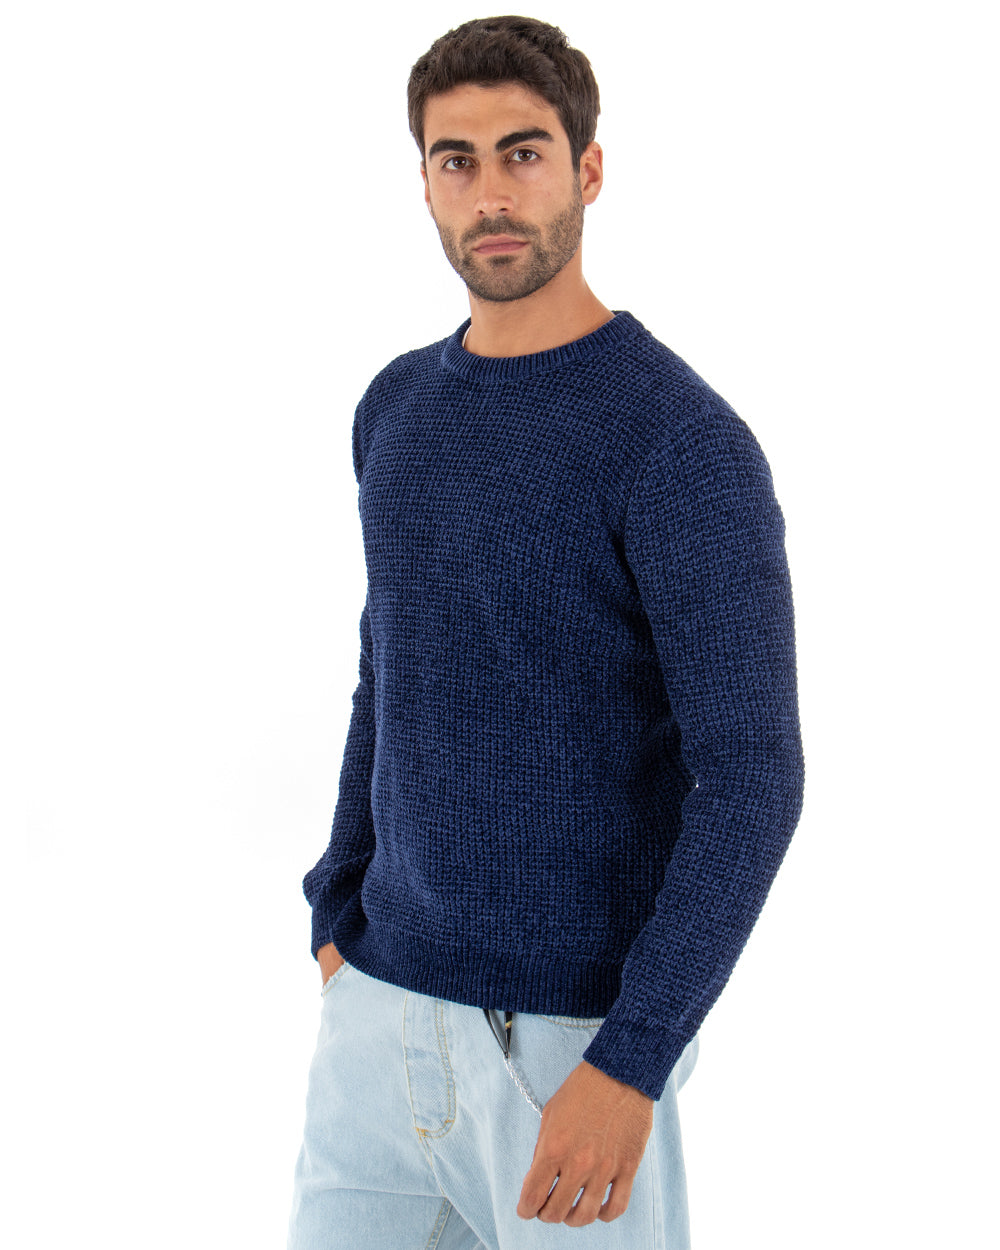 Men's Sweater Long Sleeves Chenille Solid Color Blue Crew Neck GIOSAL